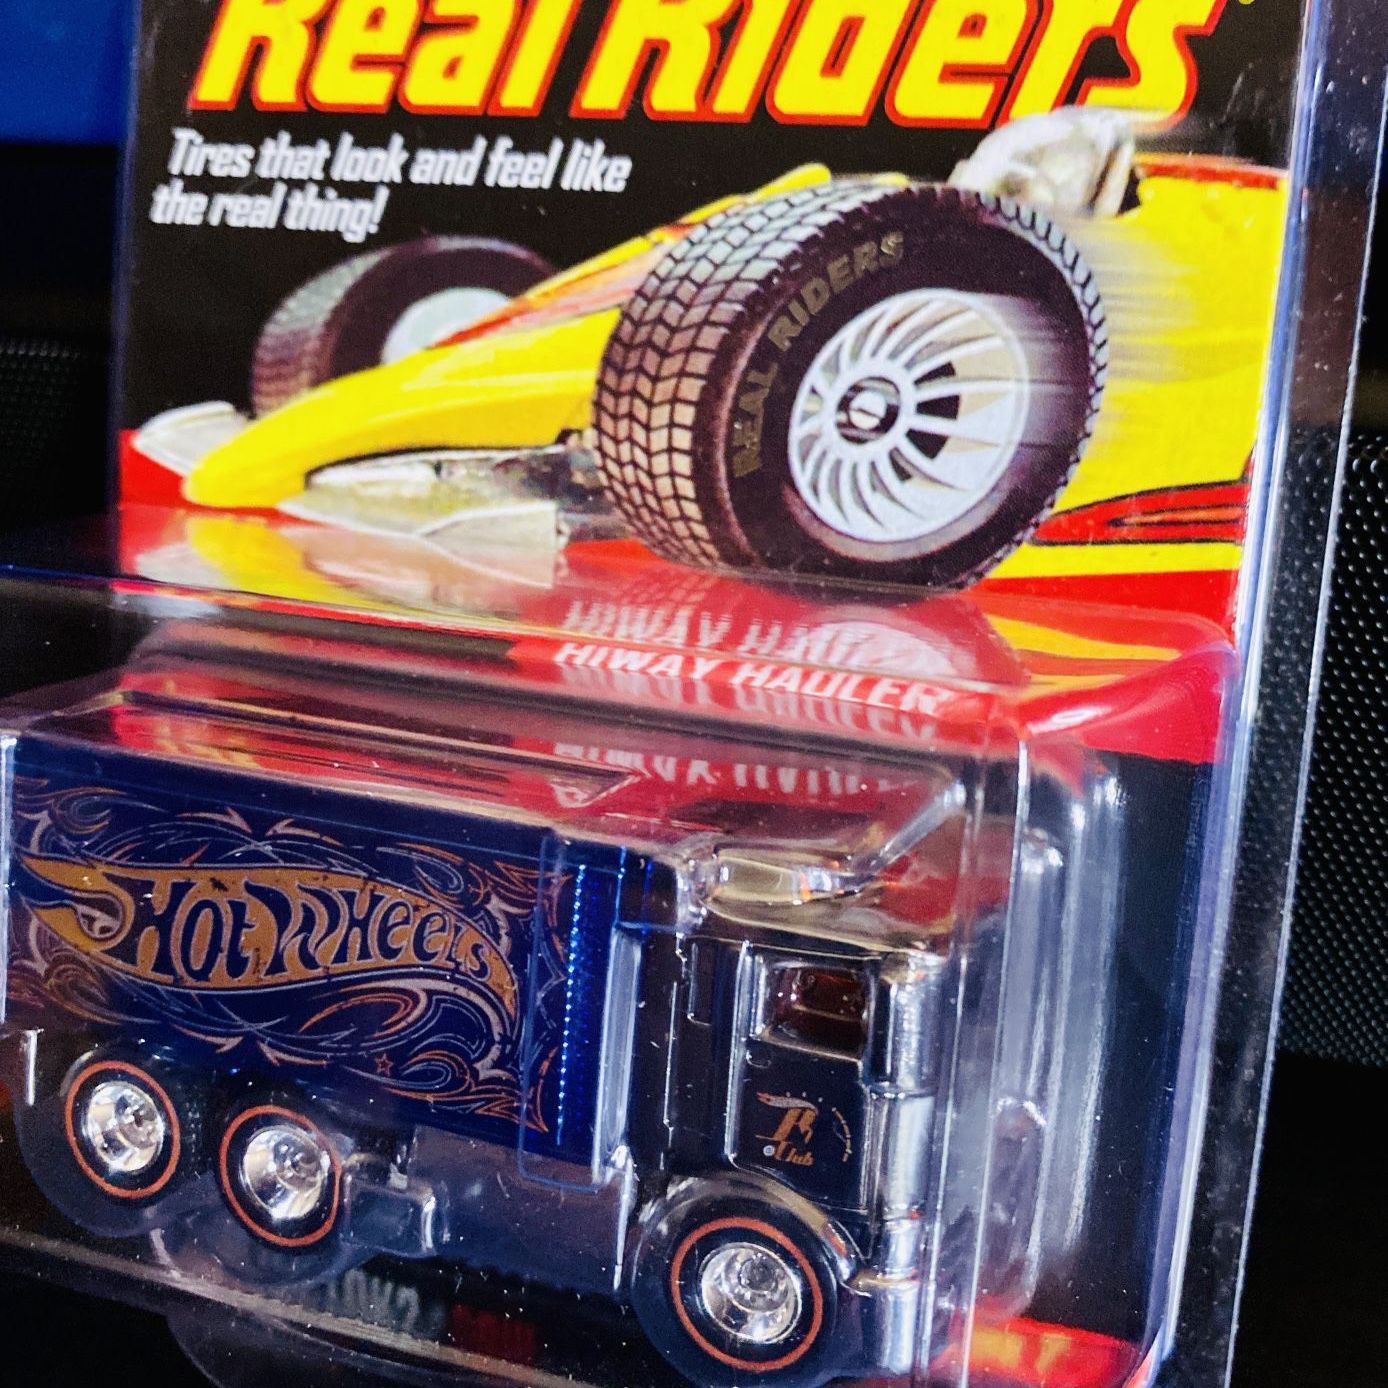 Hot wheels real riders highway holler very limited edition and loan number293/10000